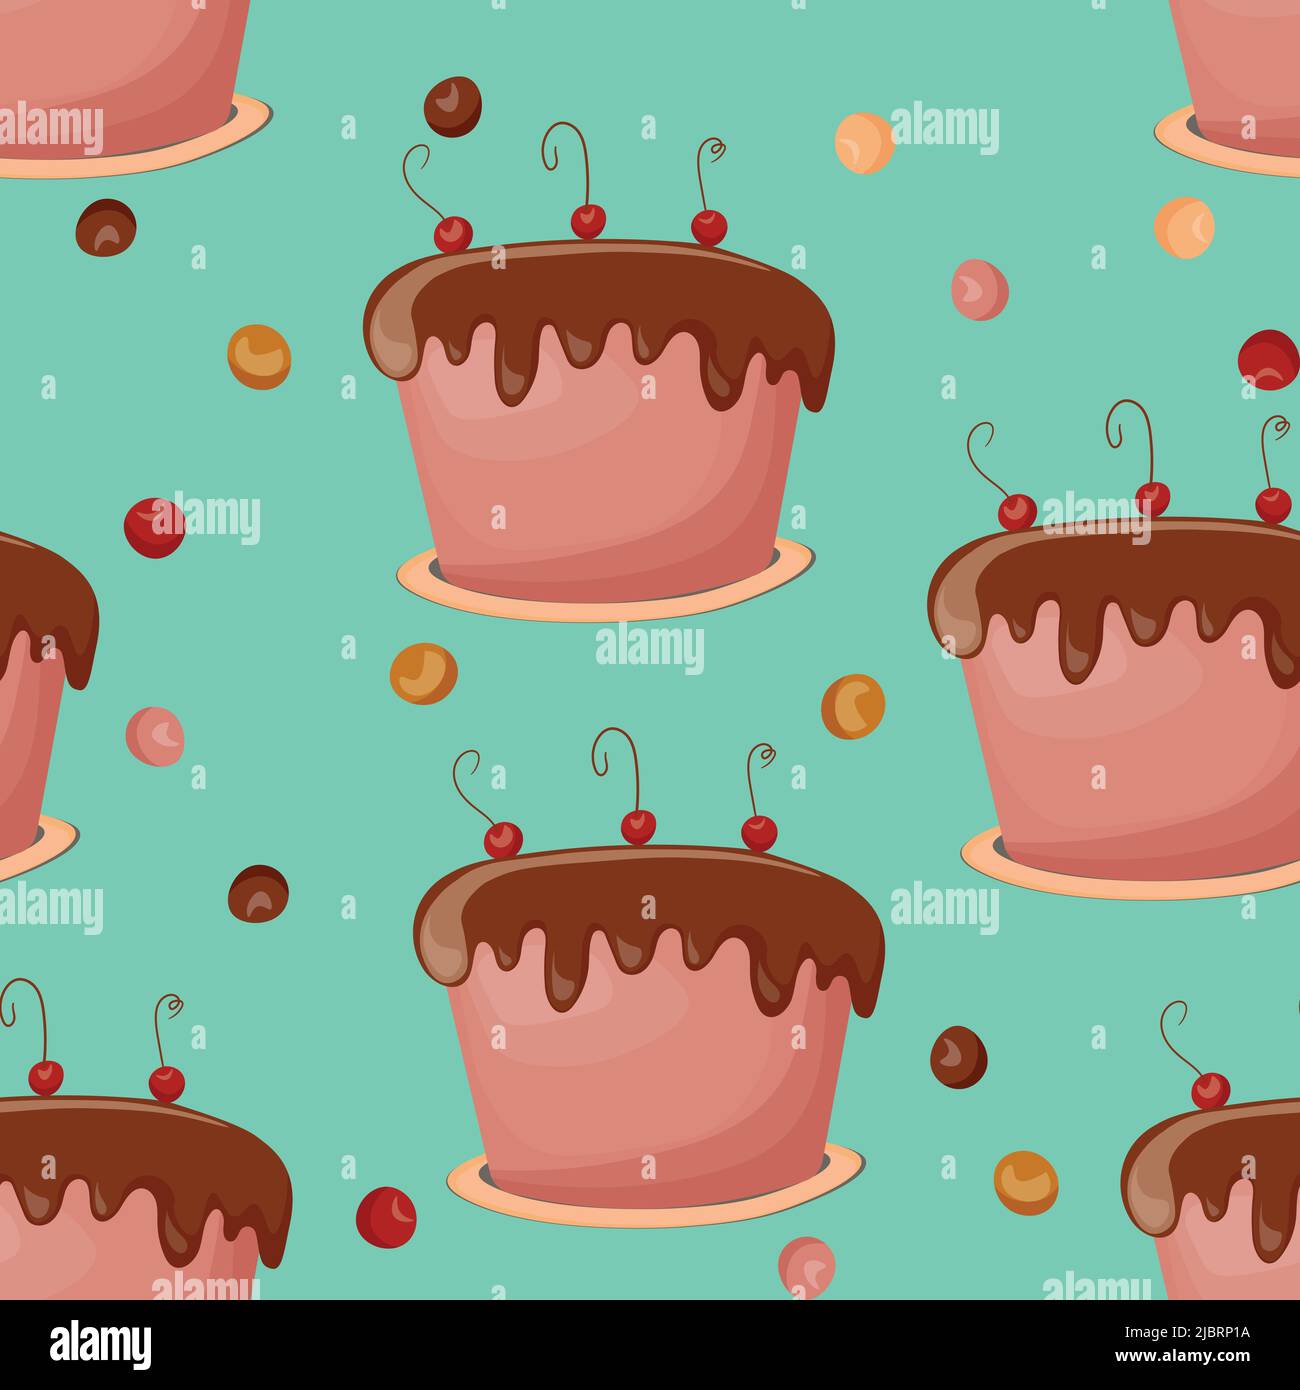 Holiday cooking seamless pattern. Cupcake, cake, sweet pastry, cupcake with colored icing and colorful details. Food concept. Realistic vector Stock Vector